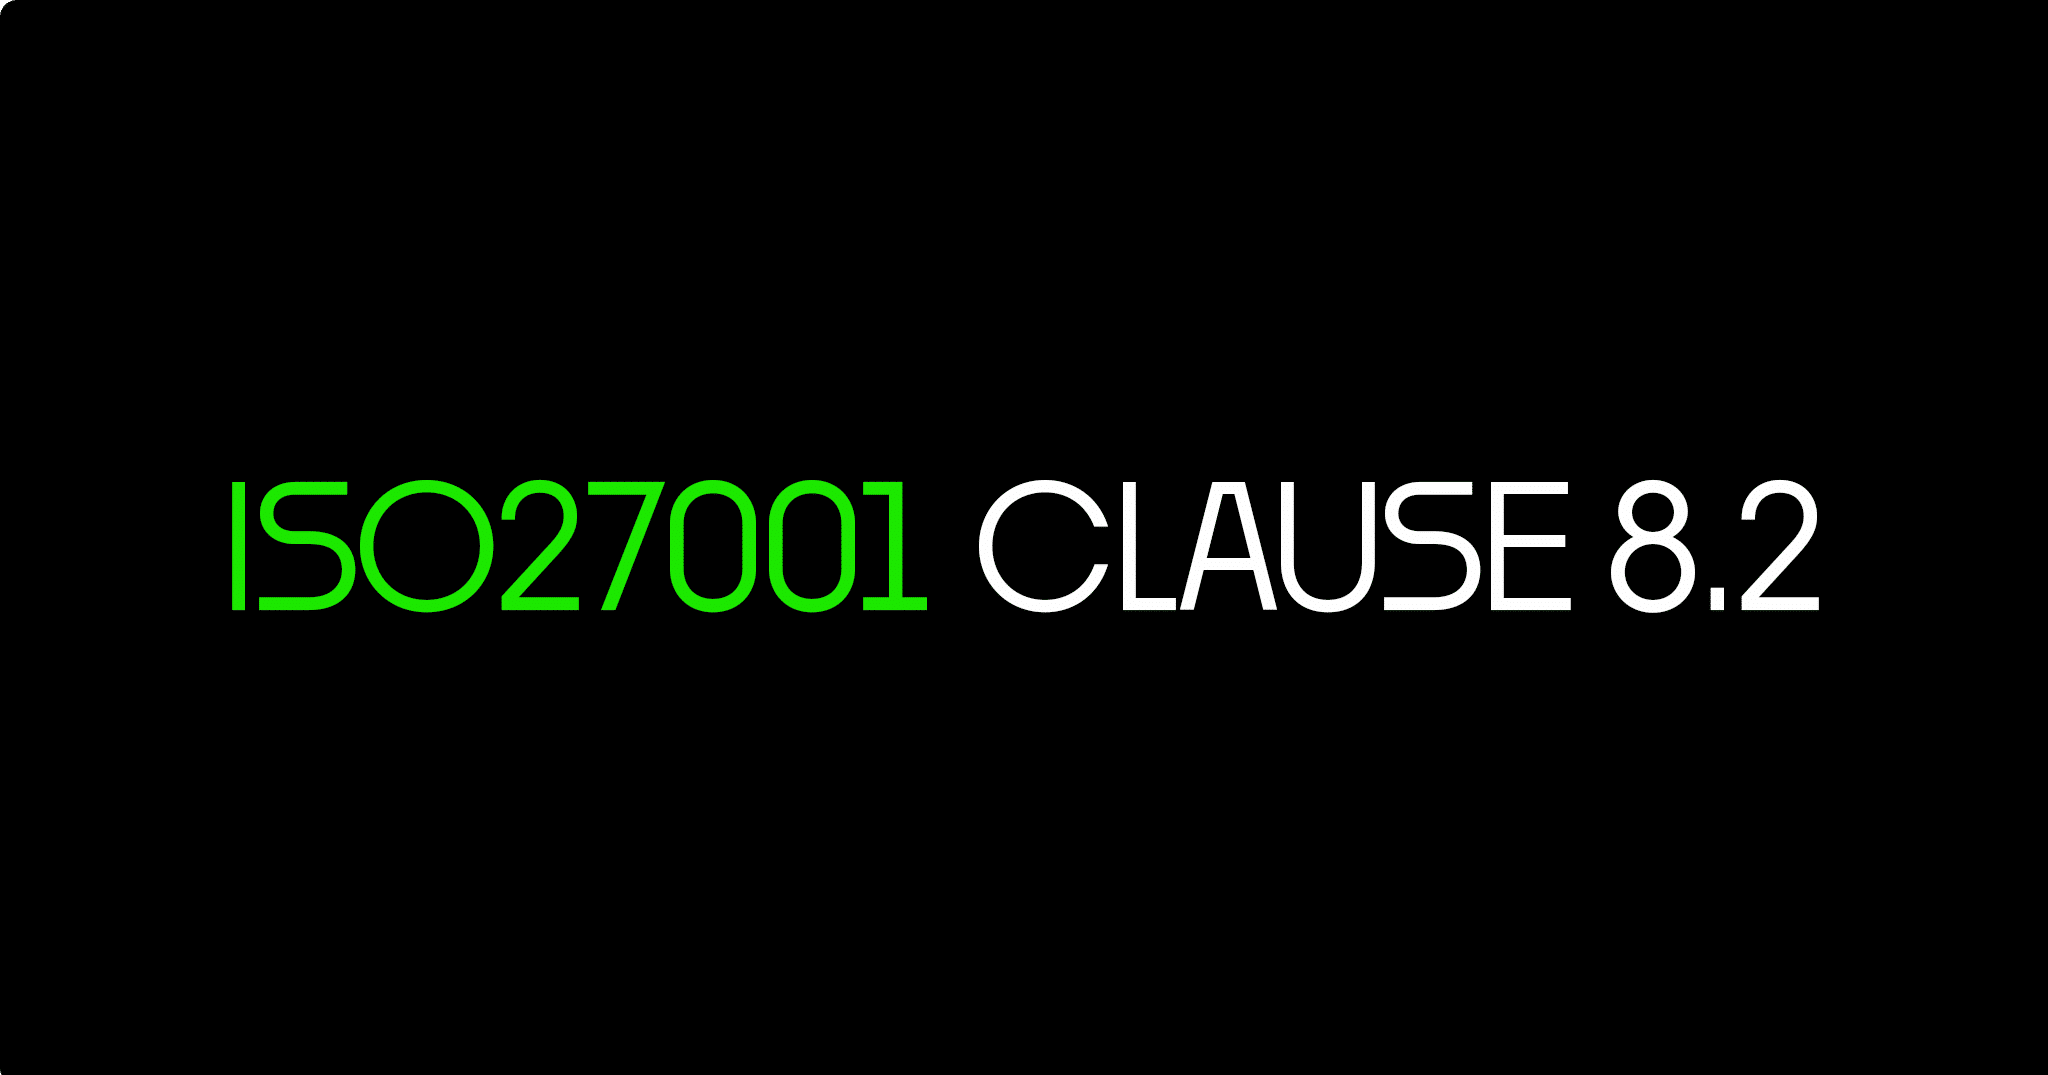 ISO 27001 Clause 8.2 Information Security Risk Assessment Certification Guide